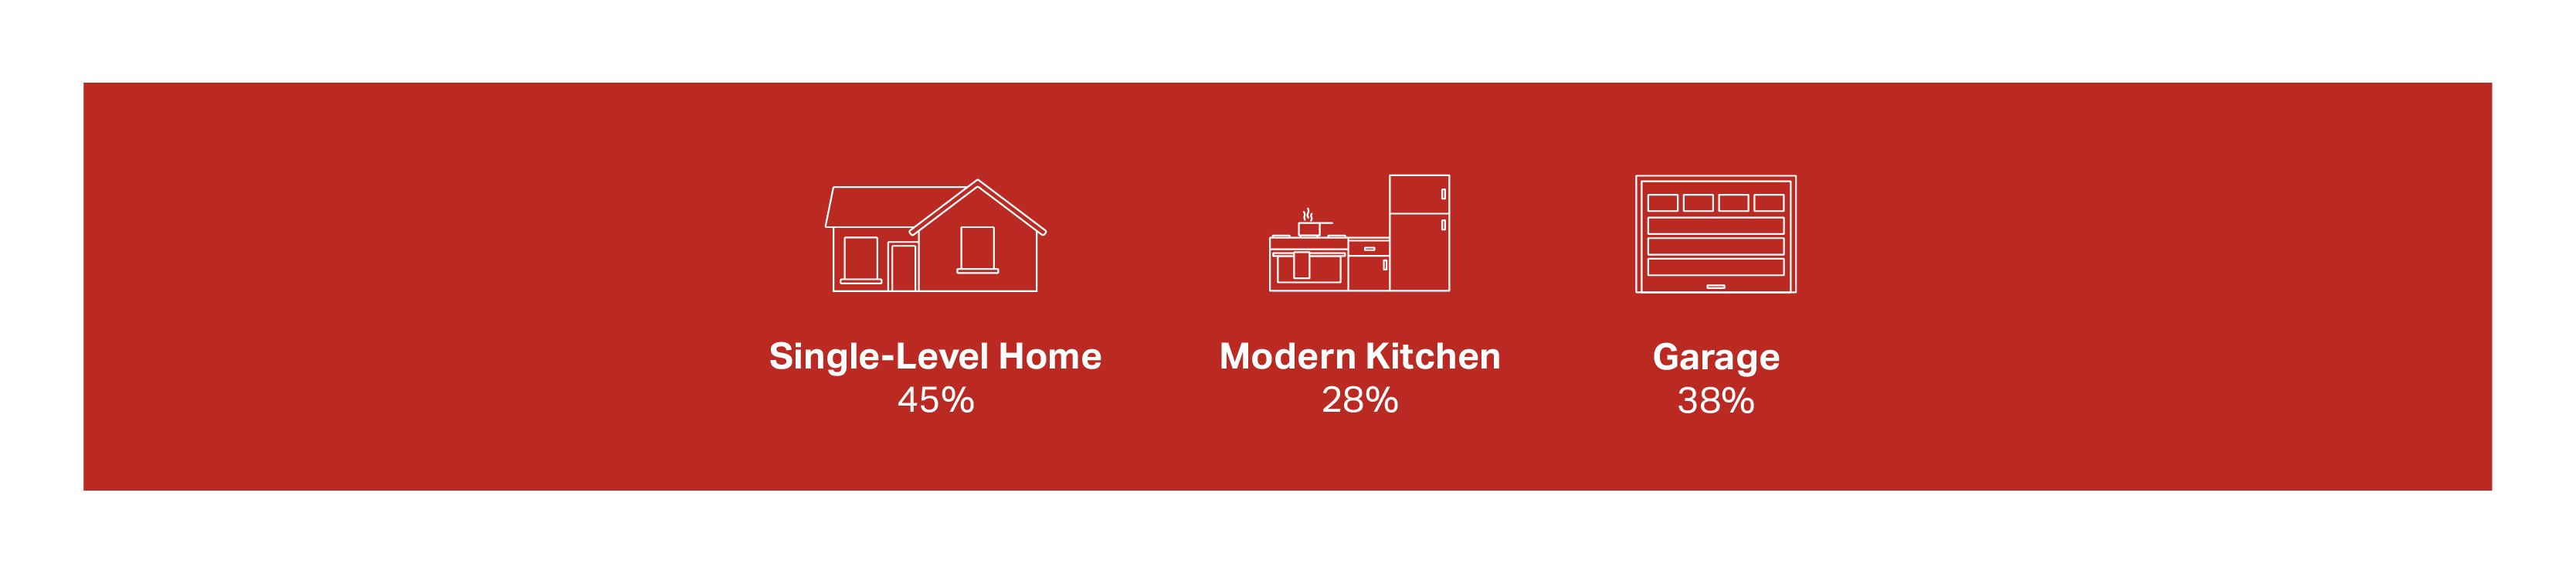 Stylized graphic depicting the results of the 2020 National Housing Survey conducted by 55places.com